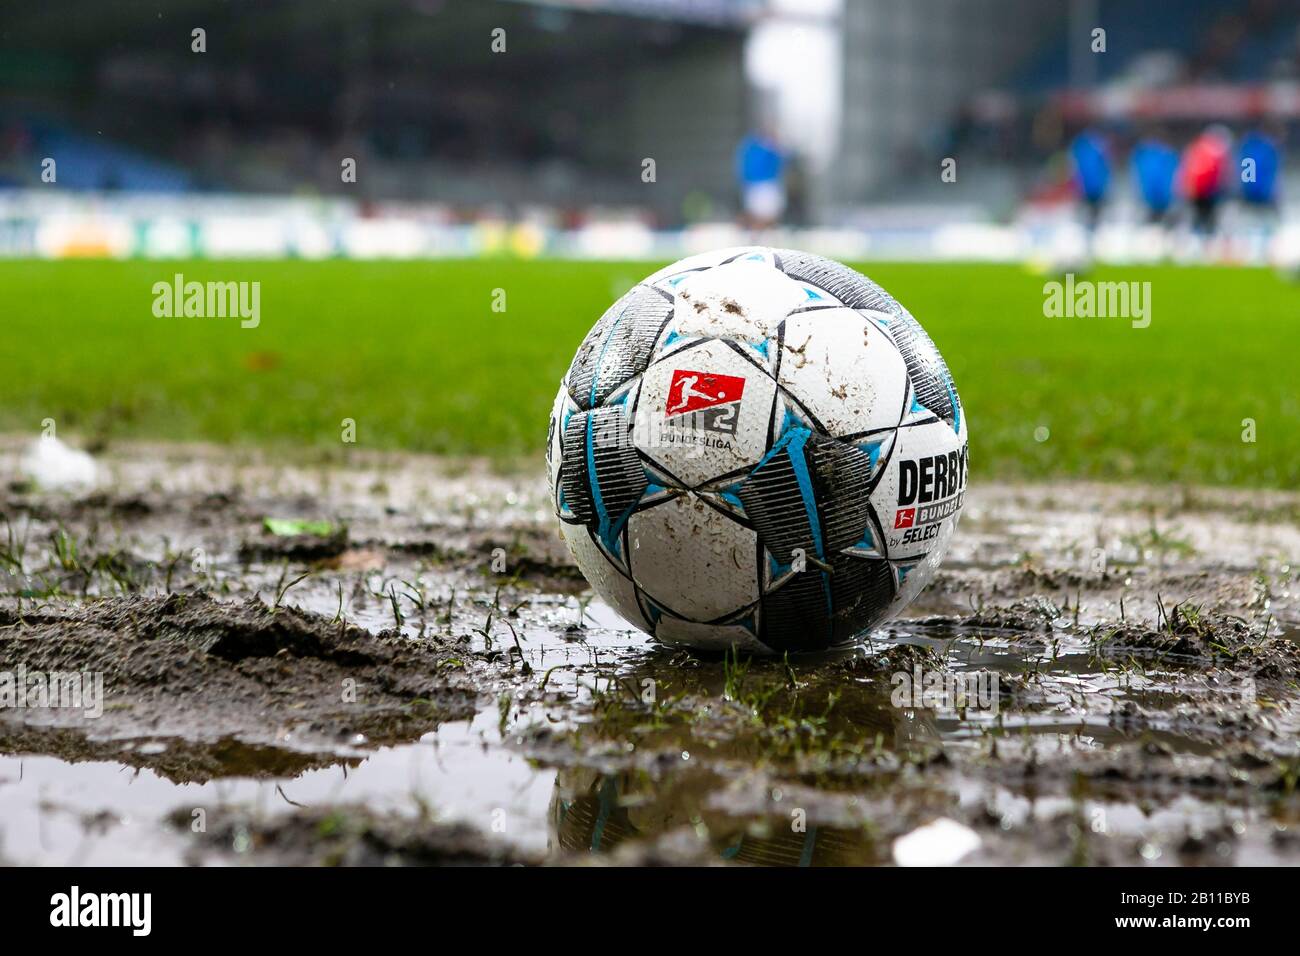 Muddy Football Ground High Resolution Stock Photography and Images - Alamy